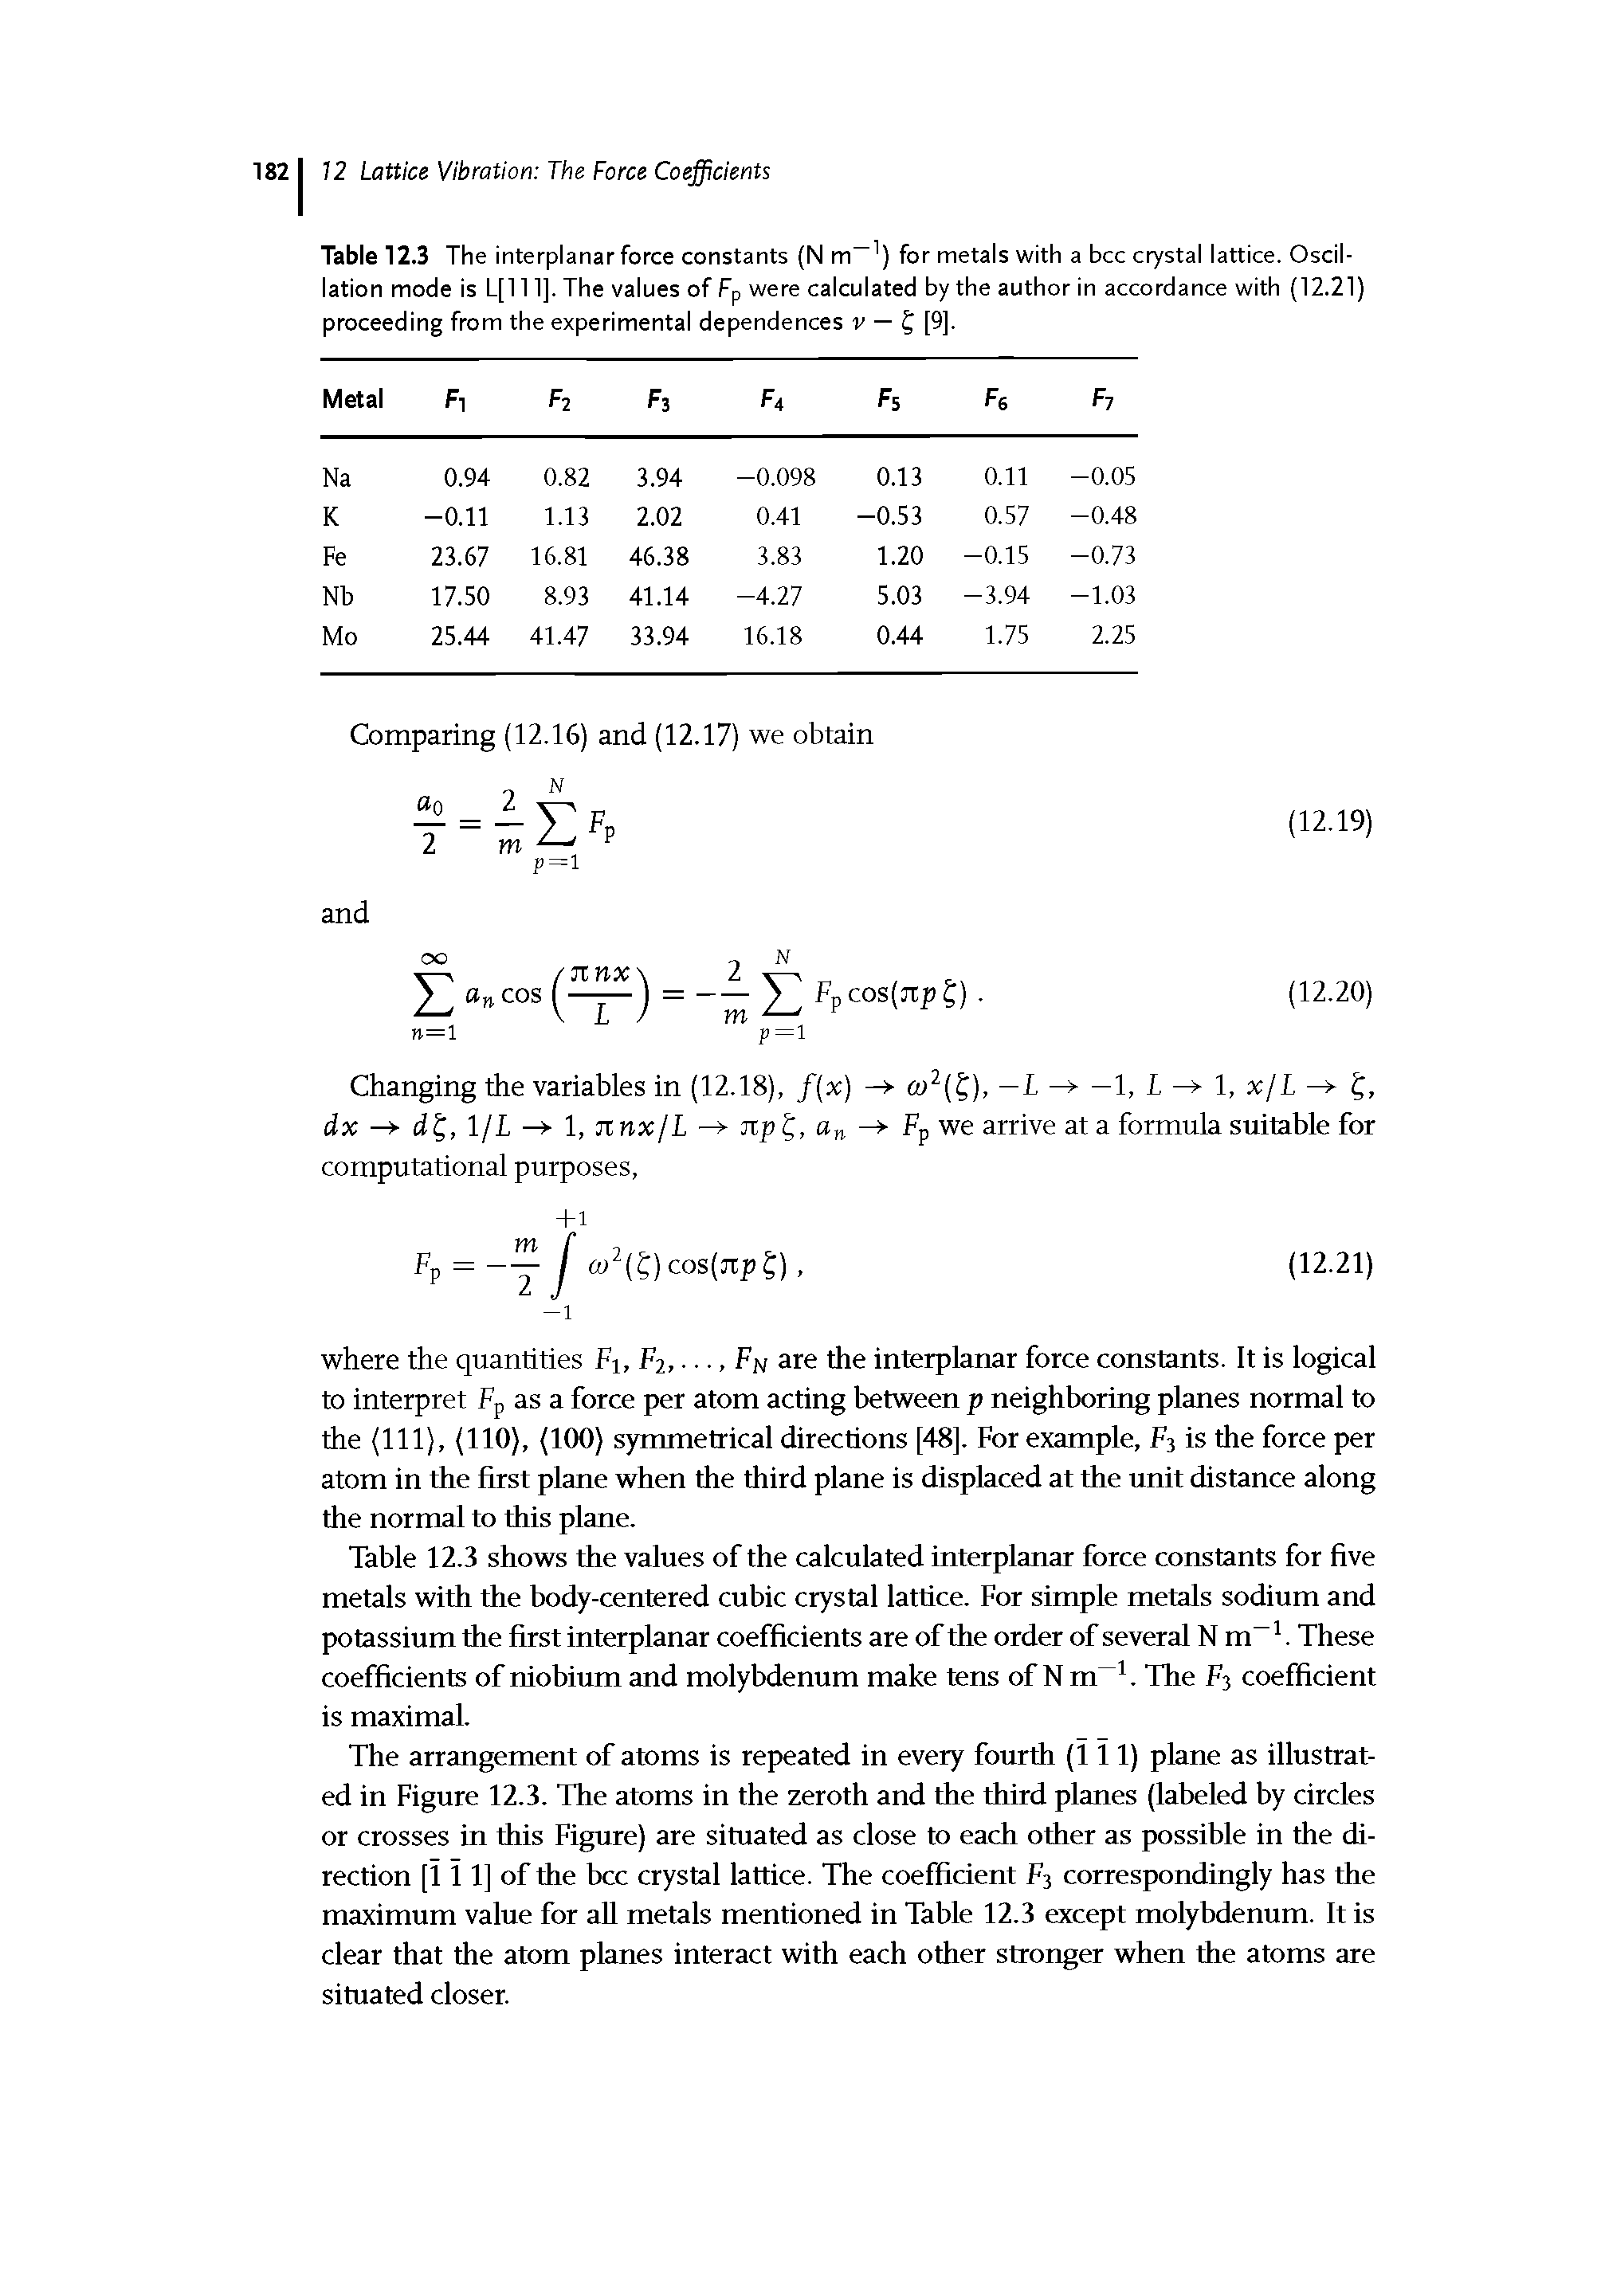 Table 12.3 The interplanar force constants (N m ) for metals with a bcc crystal lattice. Oscillation mode is L[111]. The values of Fp were calculated by the author in accordance with (12.21) proceeding from the experimental dependences r — J [9].